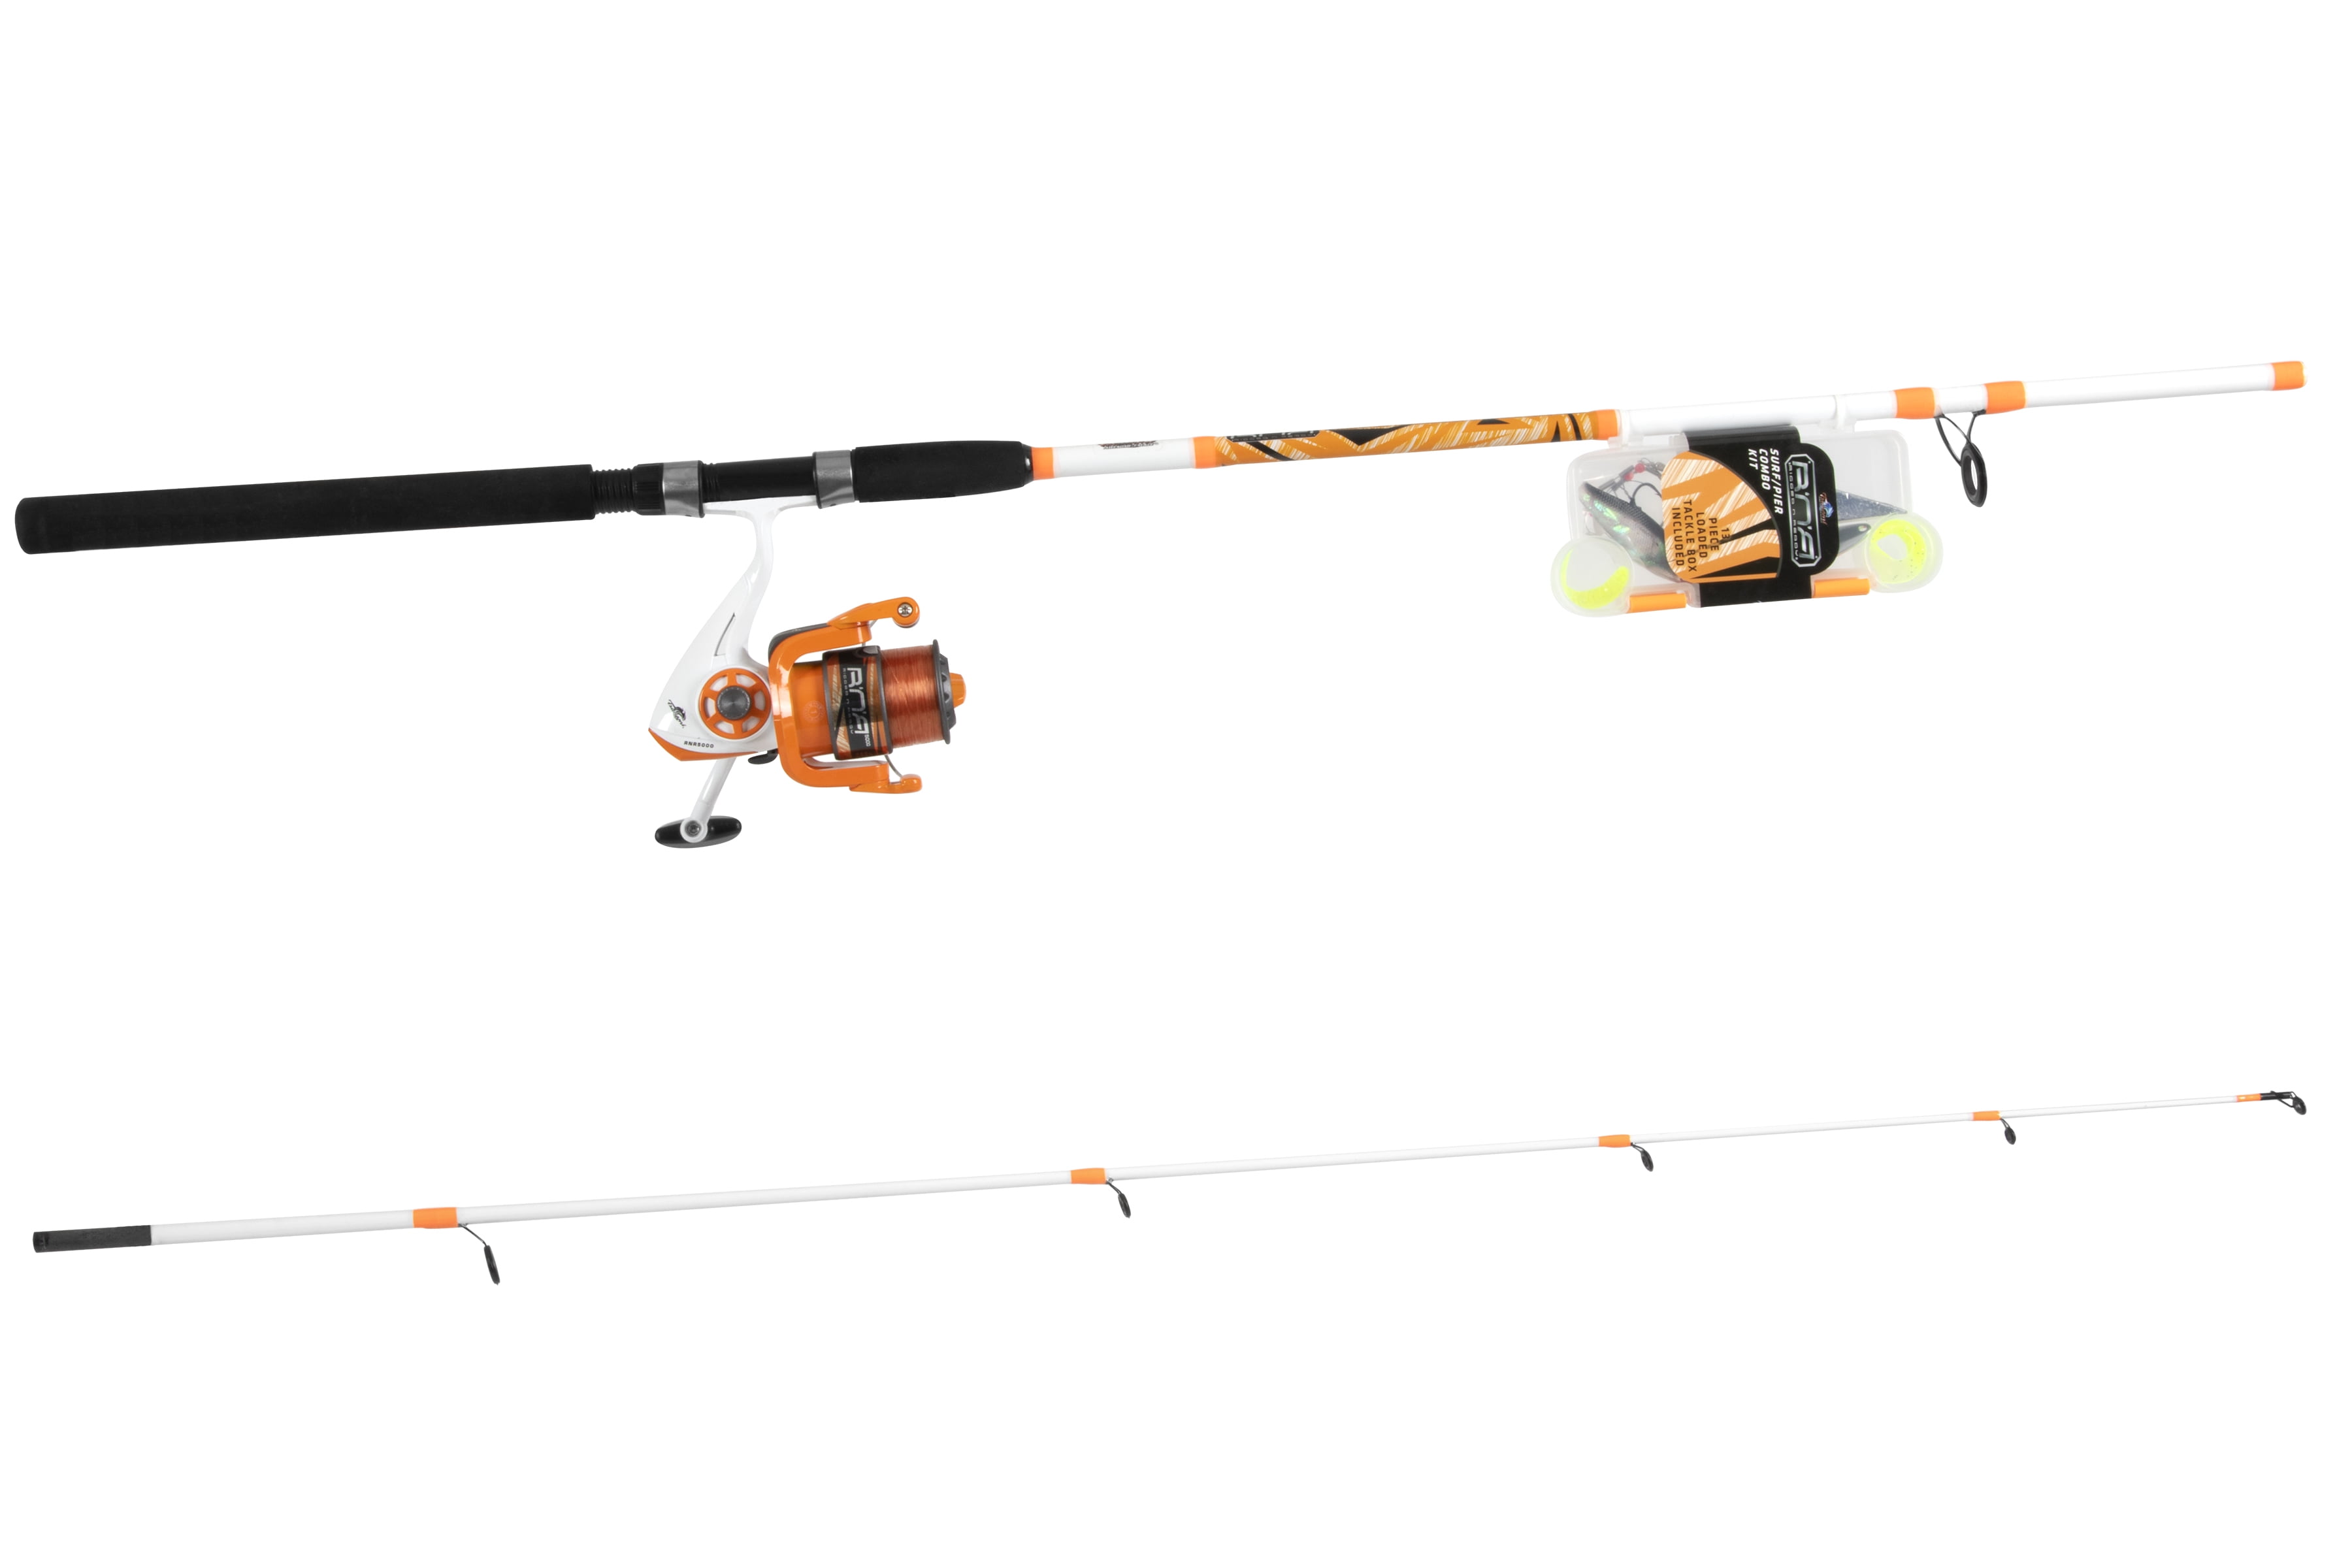  Fiberglass Fishing Pole - Strike Series Collapsible Rod and Spinning  Reel Combo Gear for Catching Walleye, Bass, Trout, and More by Wakeman  (Black) : Sports & Outdoors